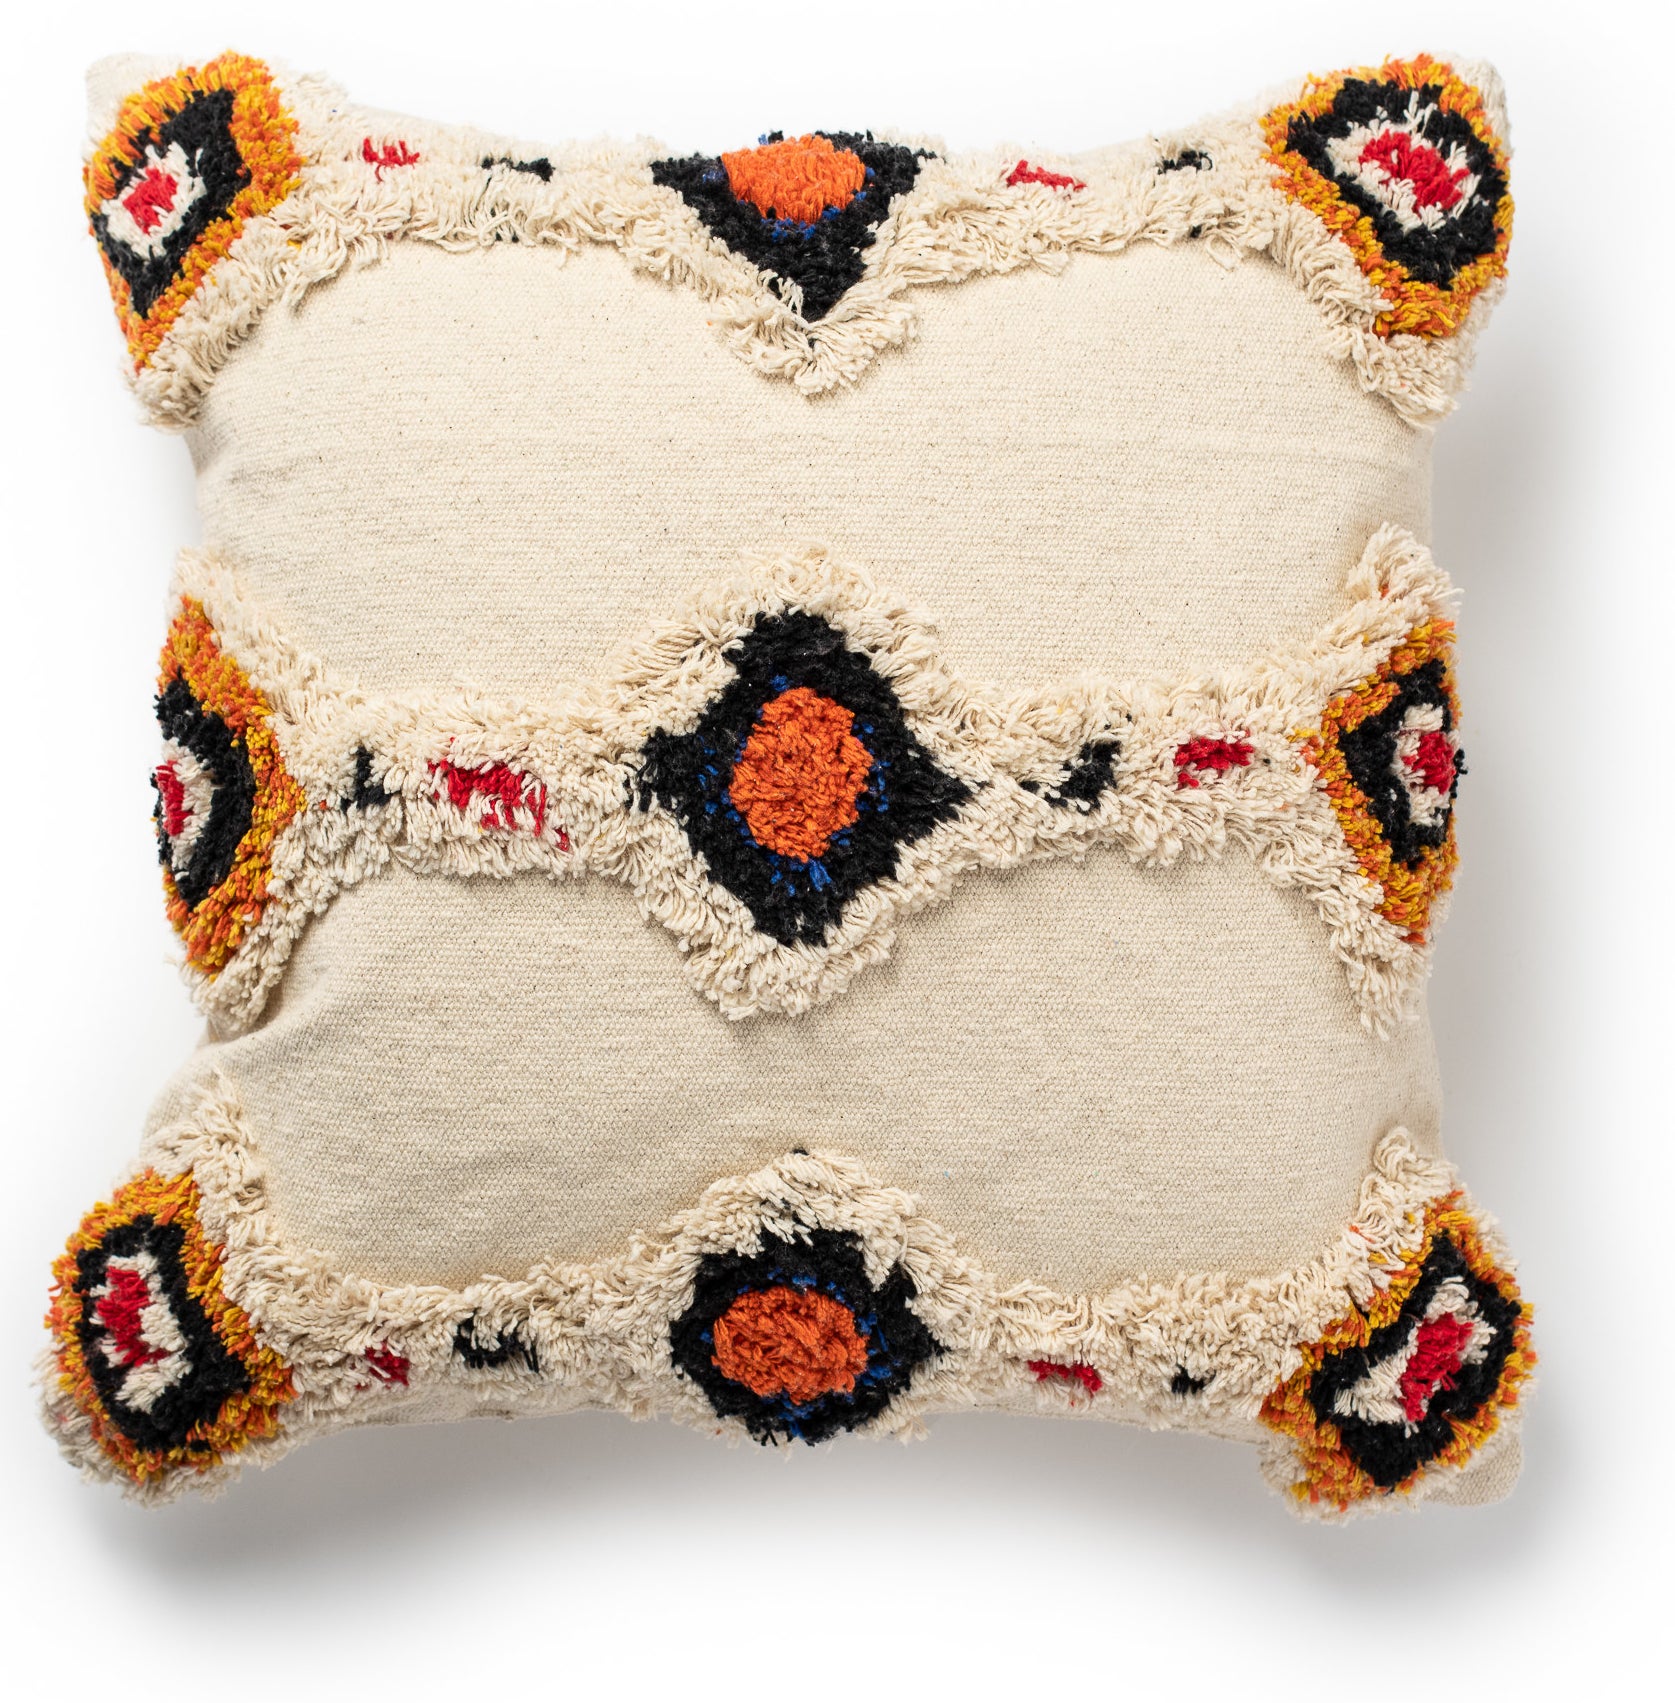 The off-white pillow with blue, red, and yellow chenille accents